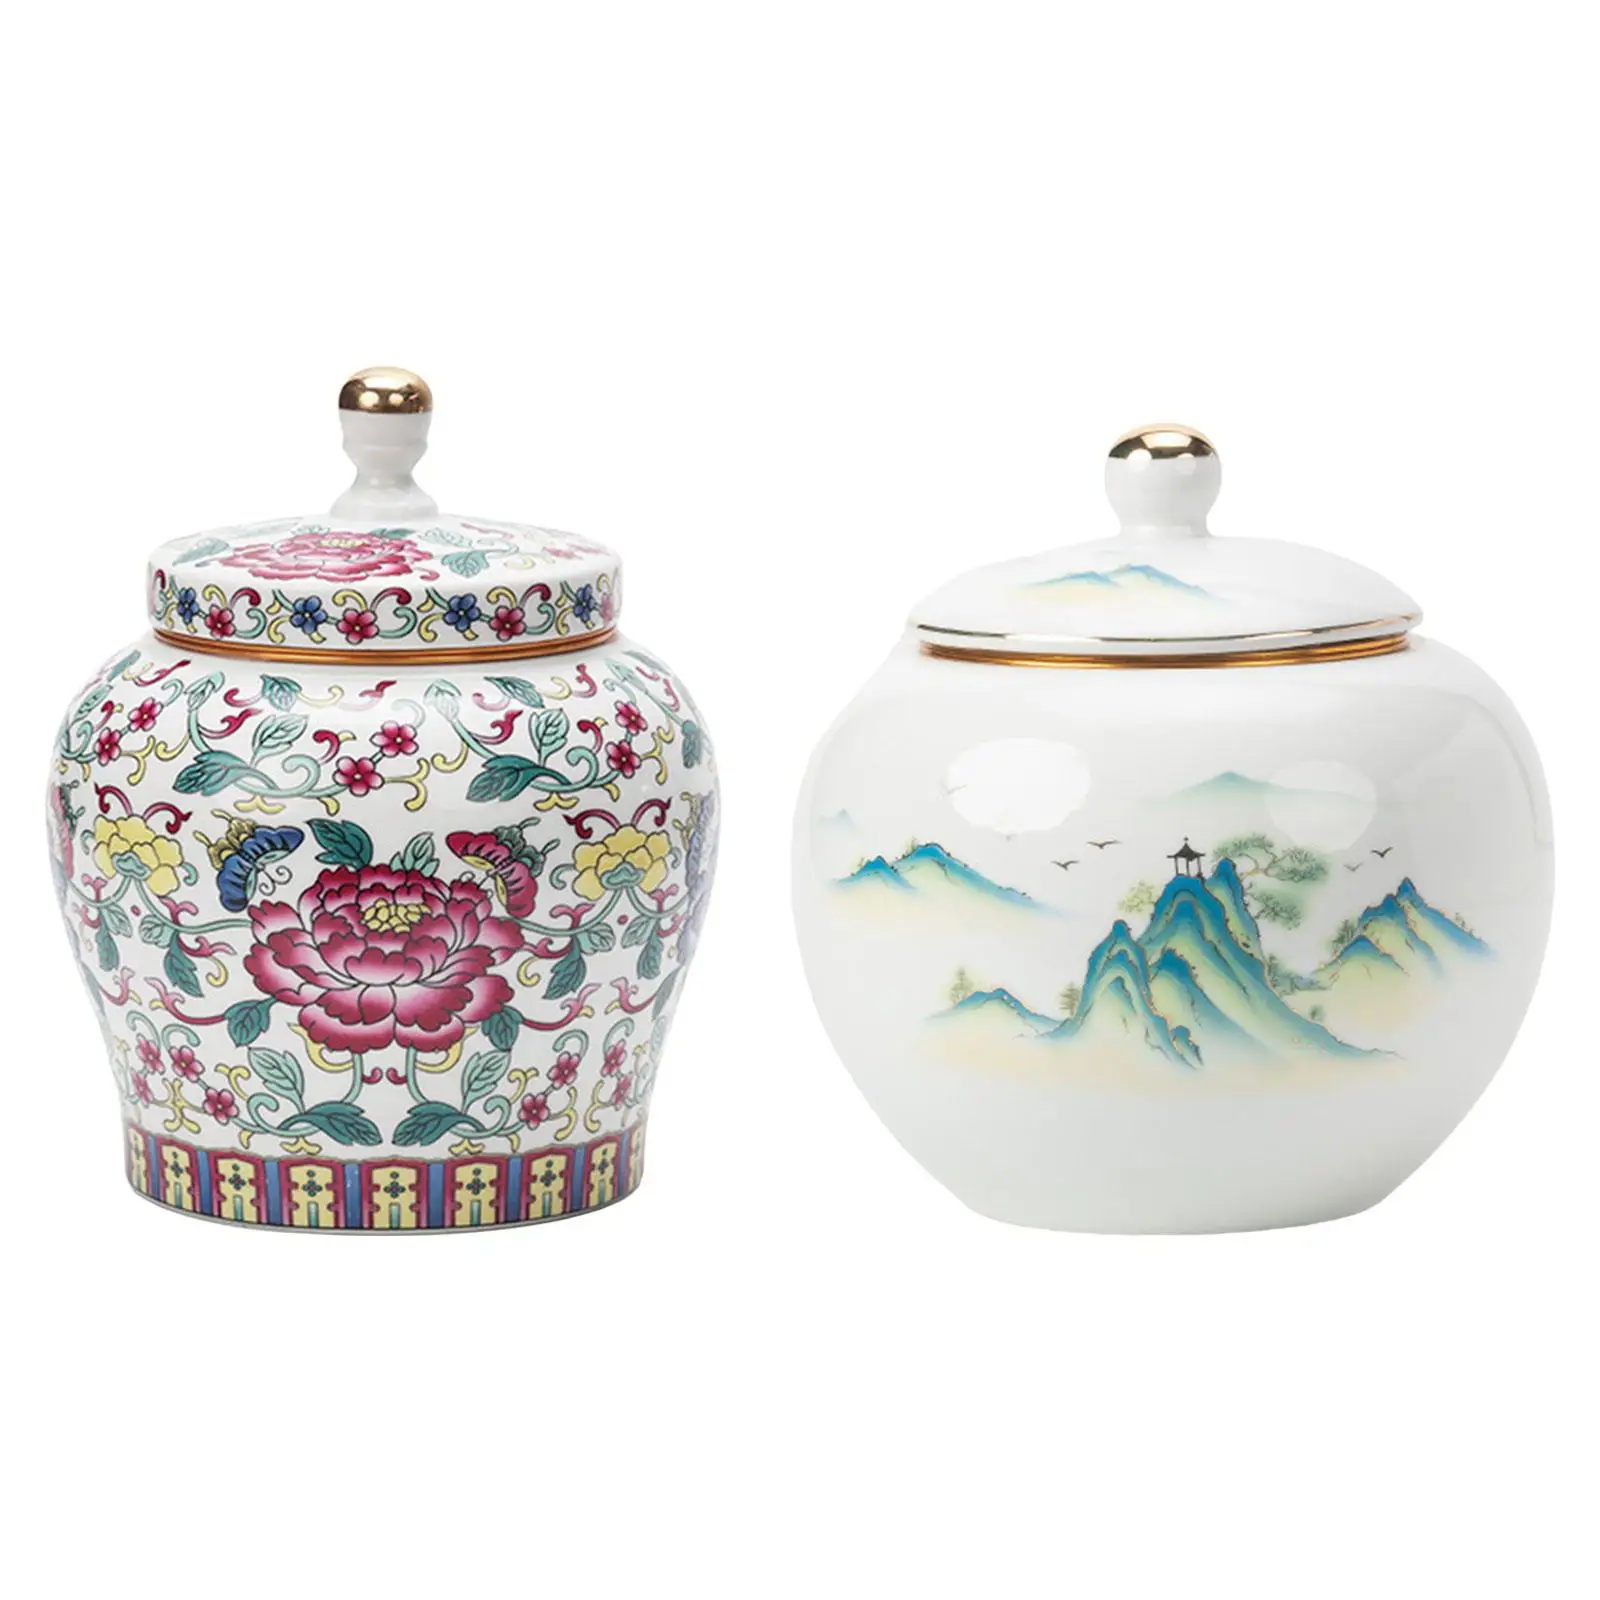 Porcelain Tea Canister Glazed Household Storage Jar Can Store Your Treasures